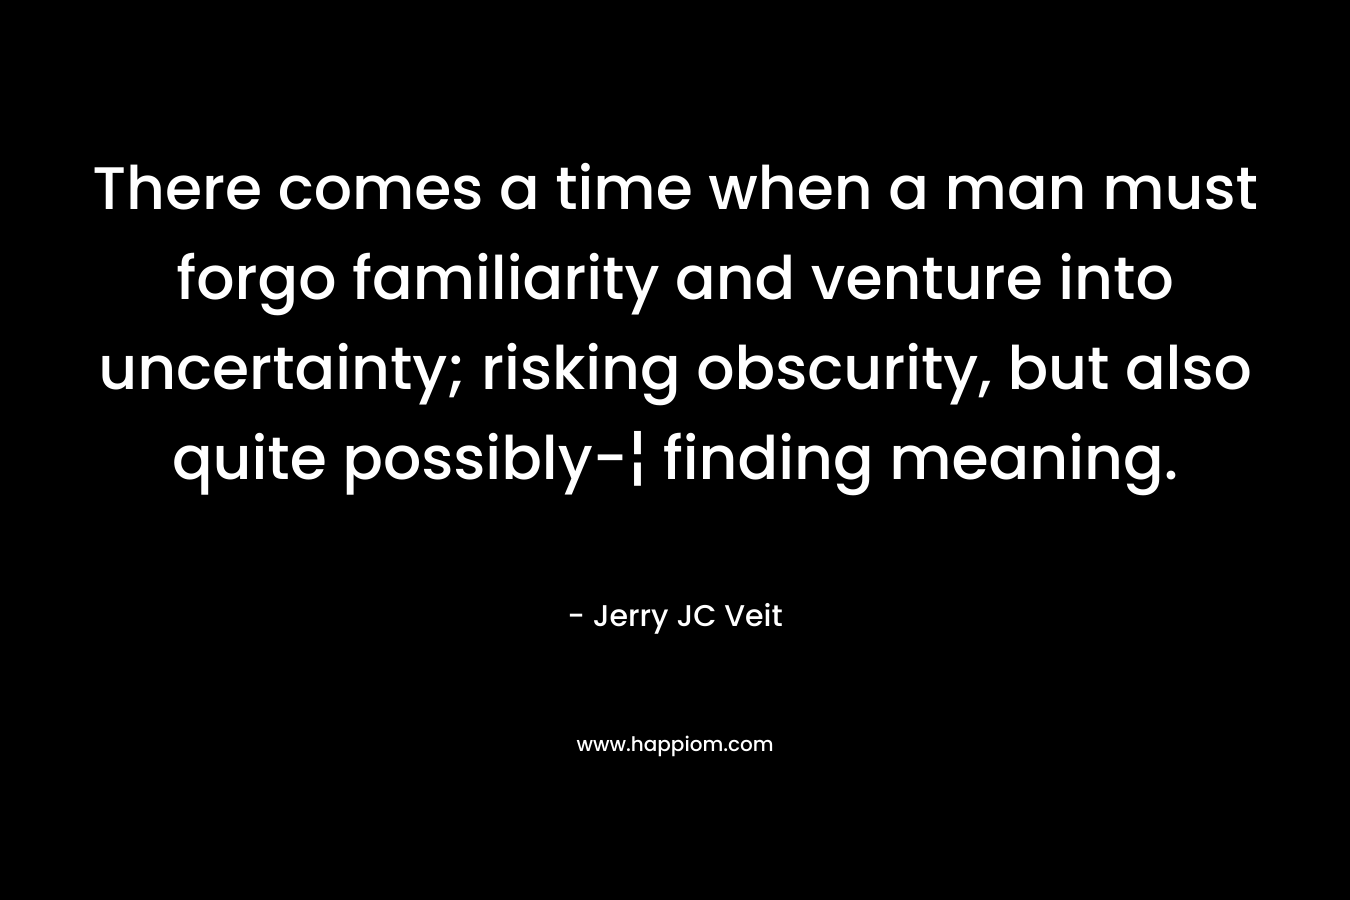 There comes a time when a man must forgo familiarity and venture into uncertainty; risking obscurity, but also quite possibly-¦ finding meaning. – Jerry JC Veit